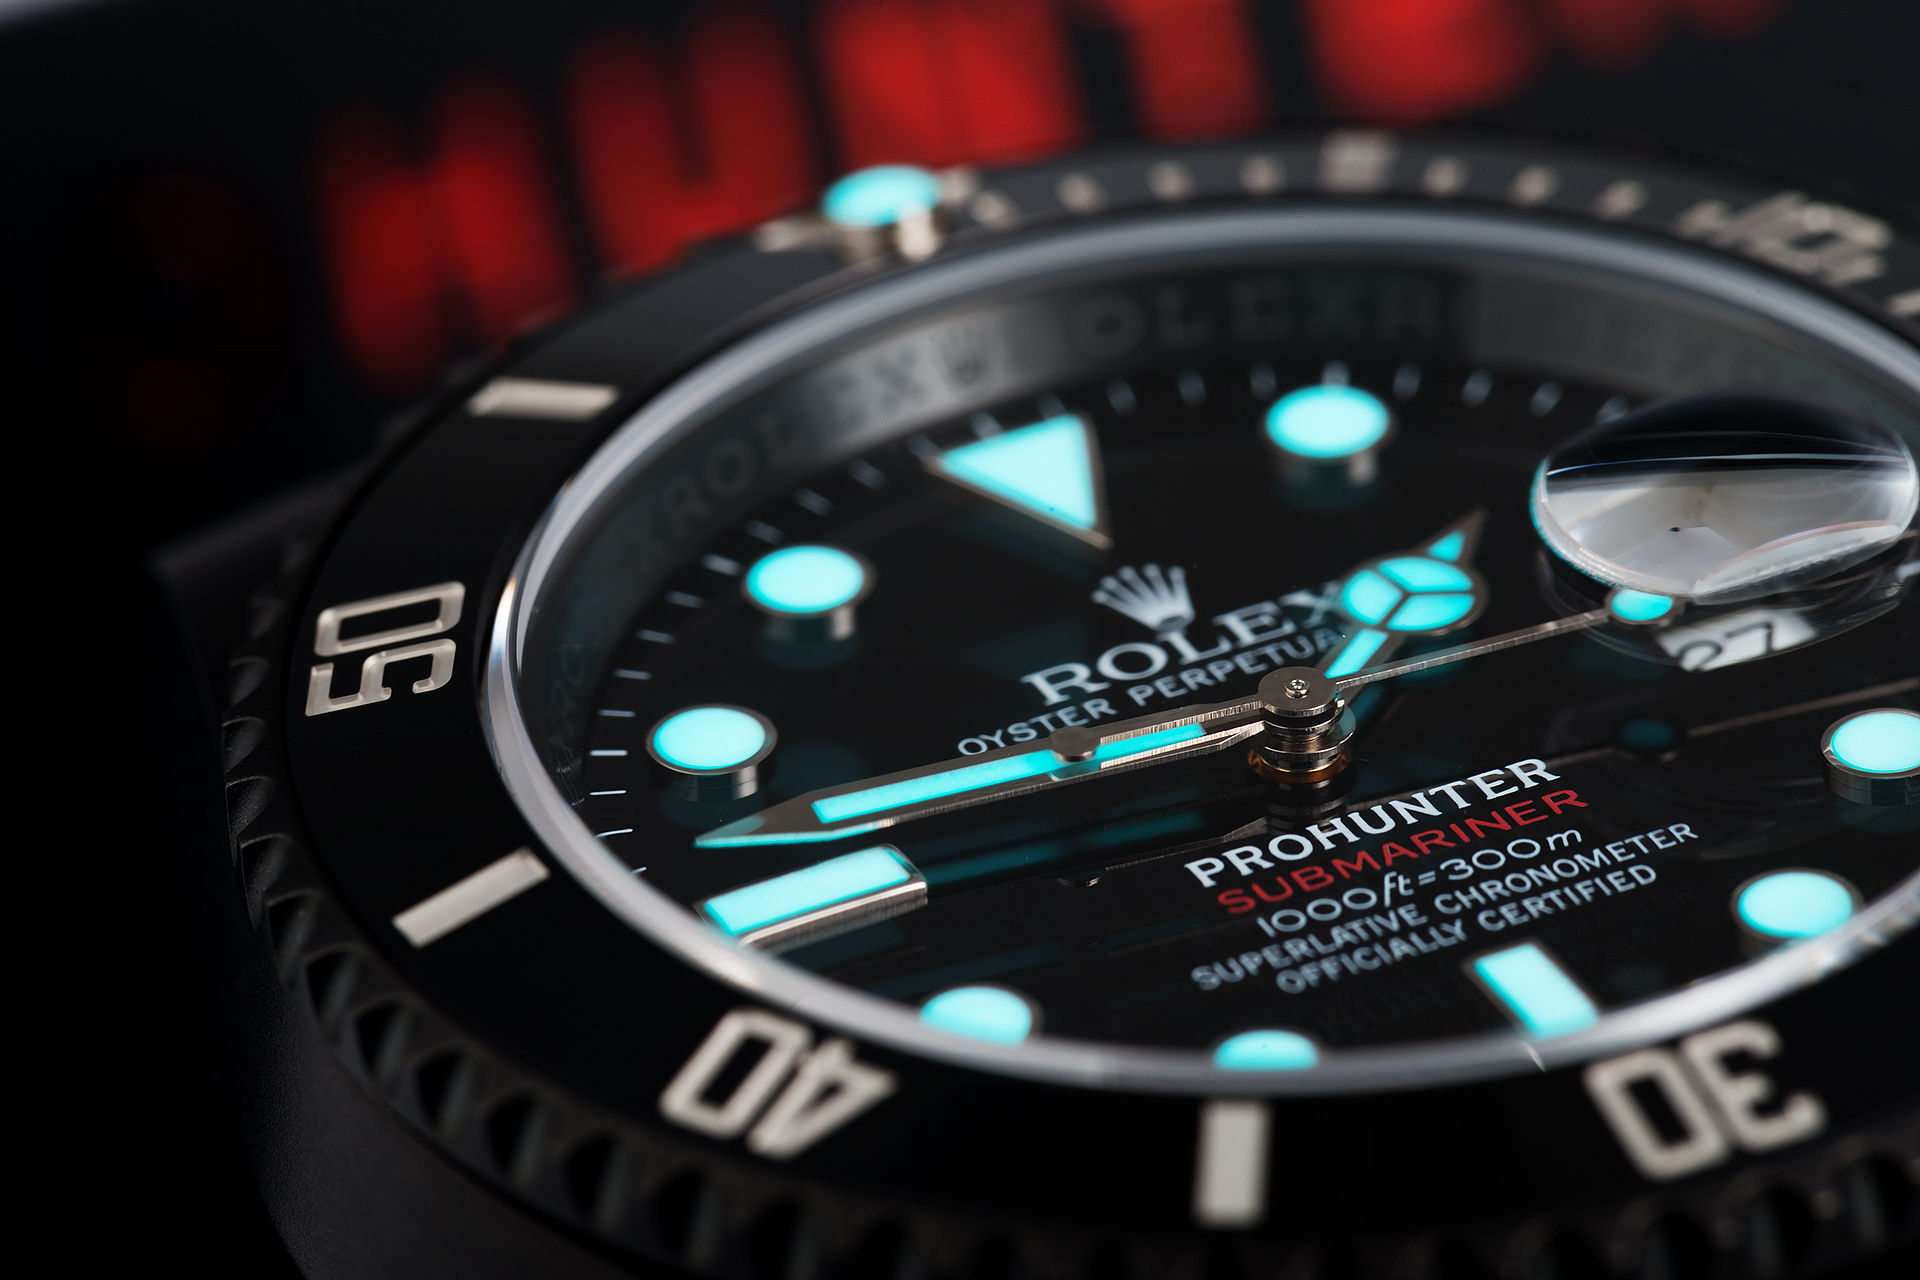 ref 116610LN | Limited Edition 'One of 100' | Pro Hunter Stealth Submariner Date